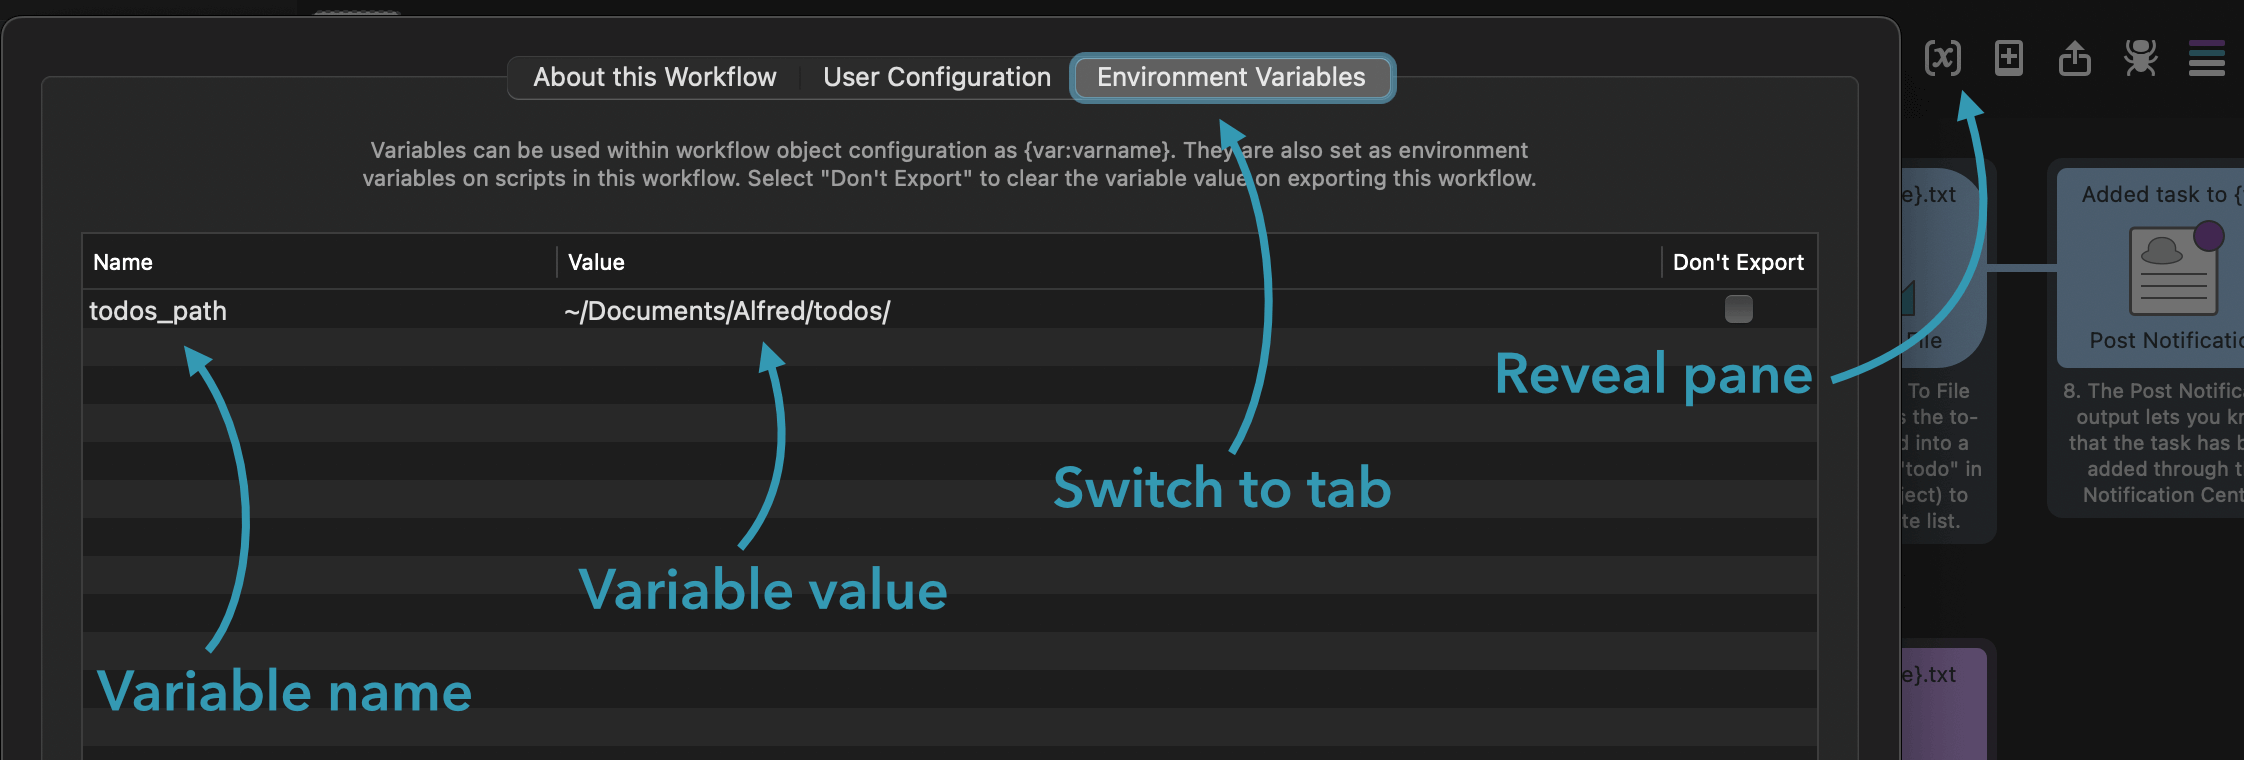 Workflow Environment Variables